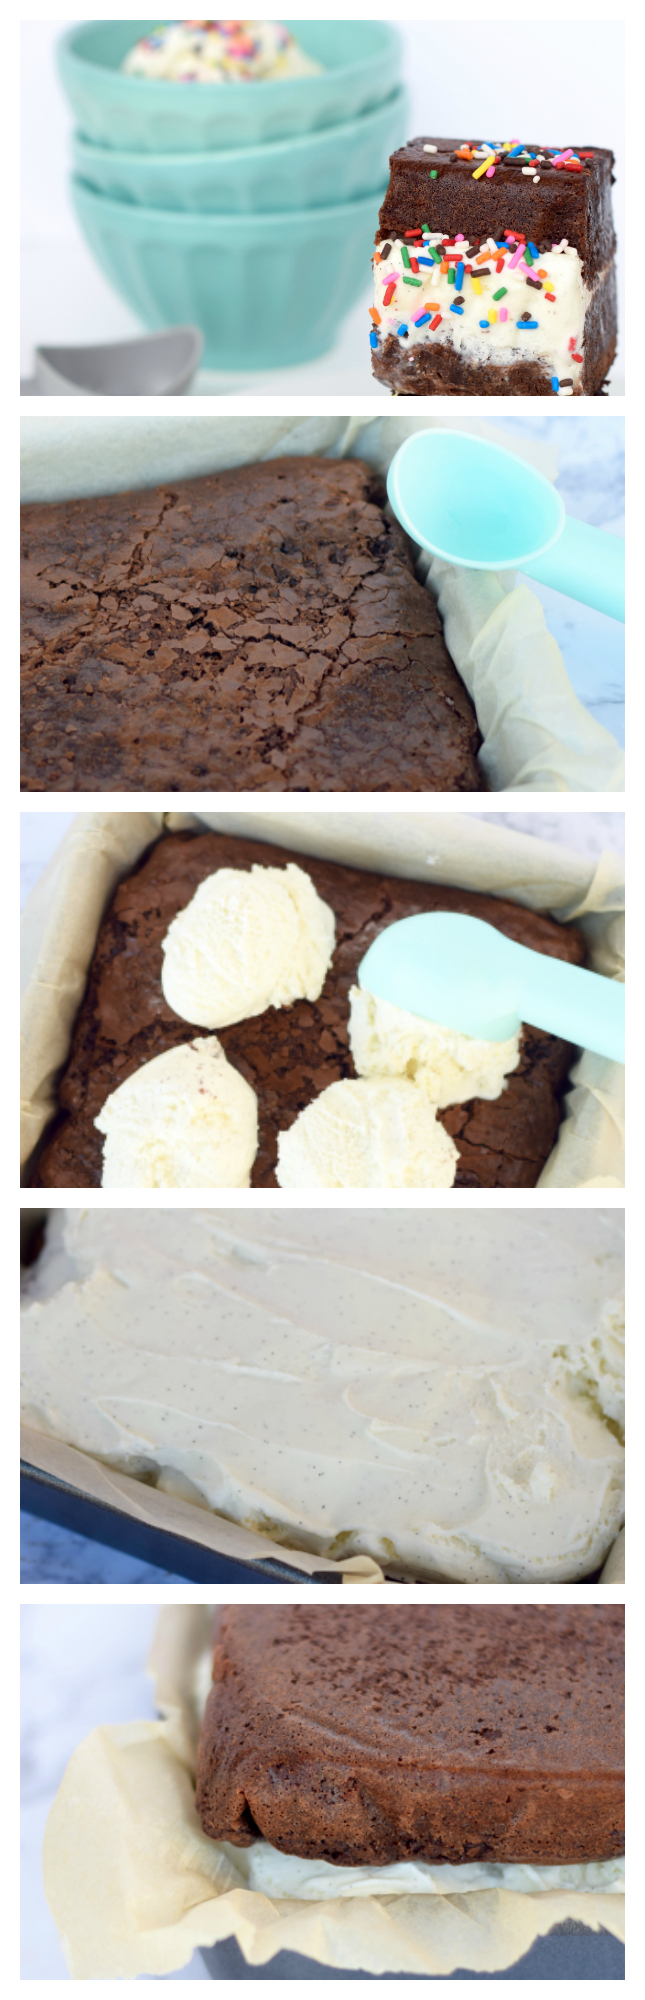 How To Make Brownie Ice Cream Sandwiches